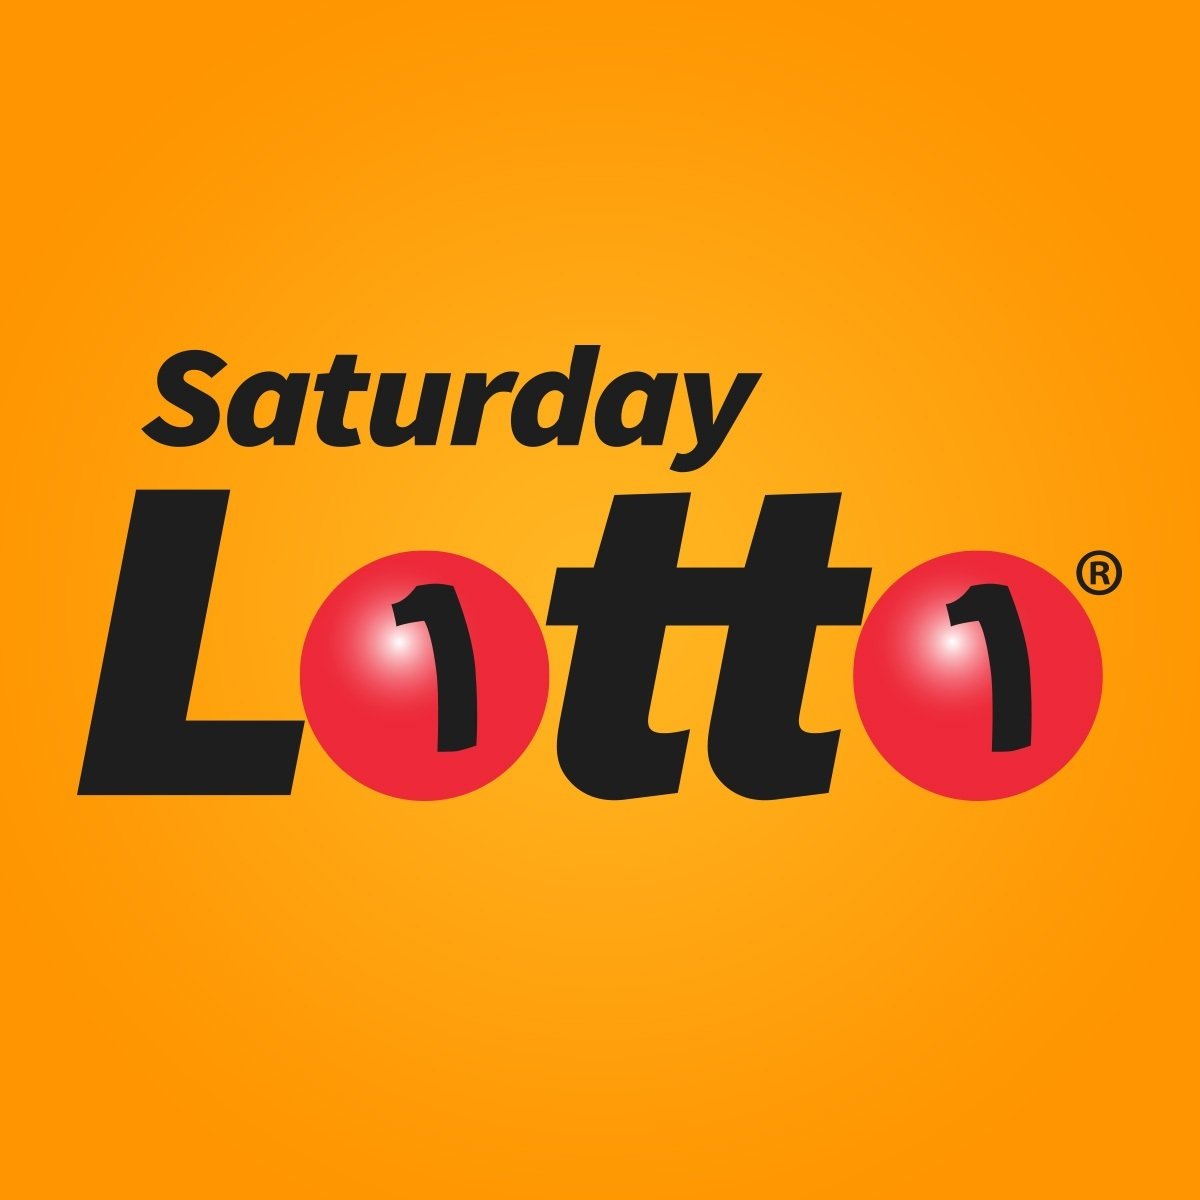 saturday tattslotto results and dividends